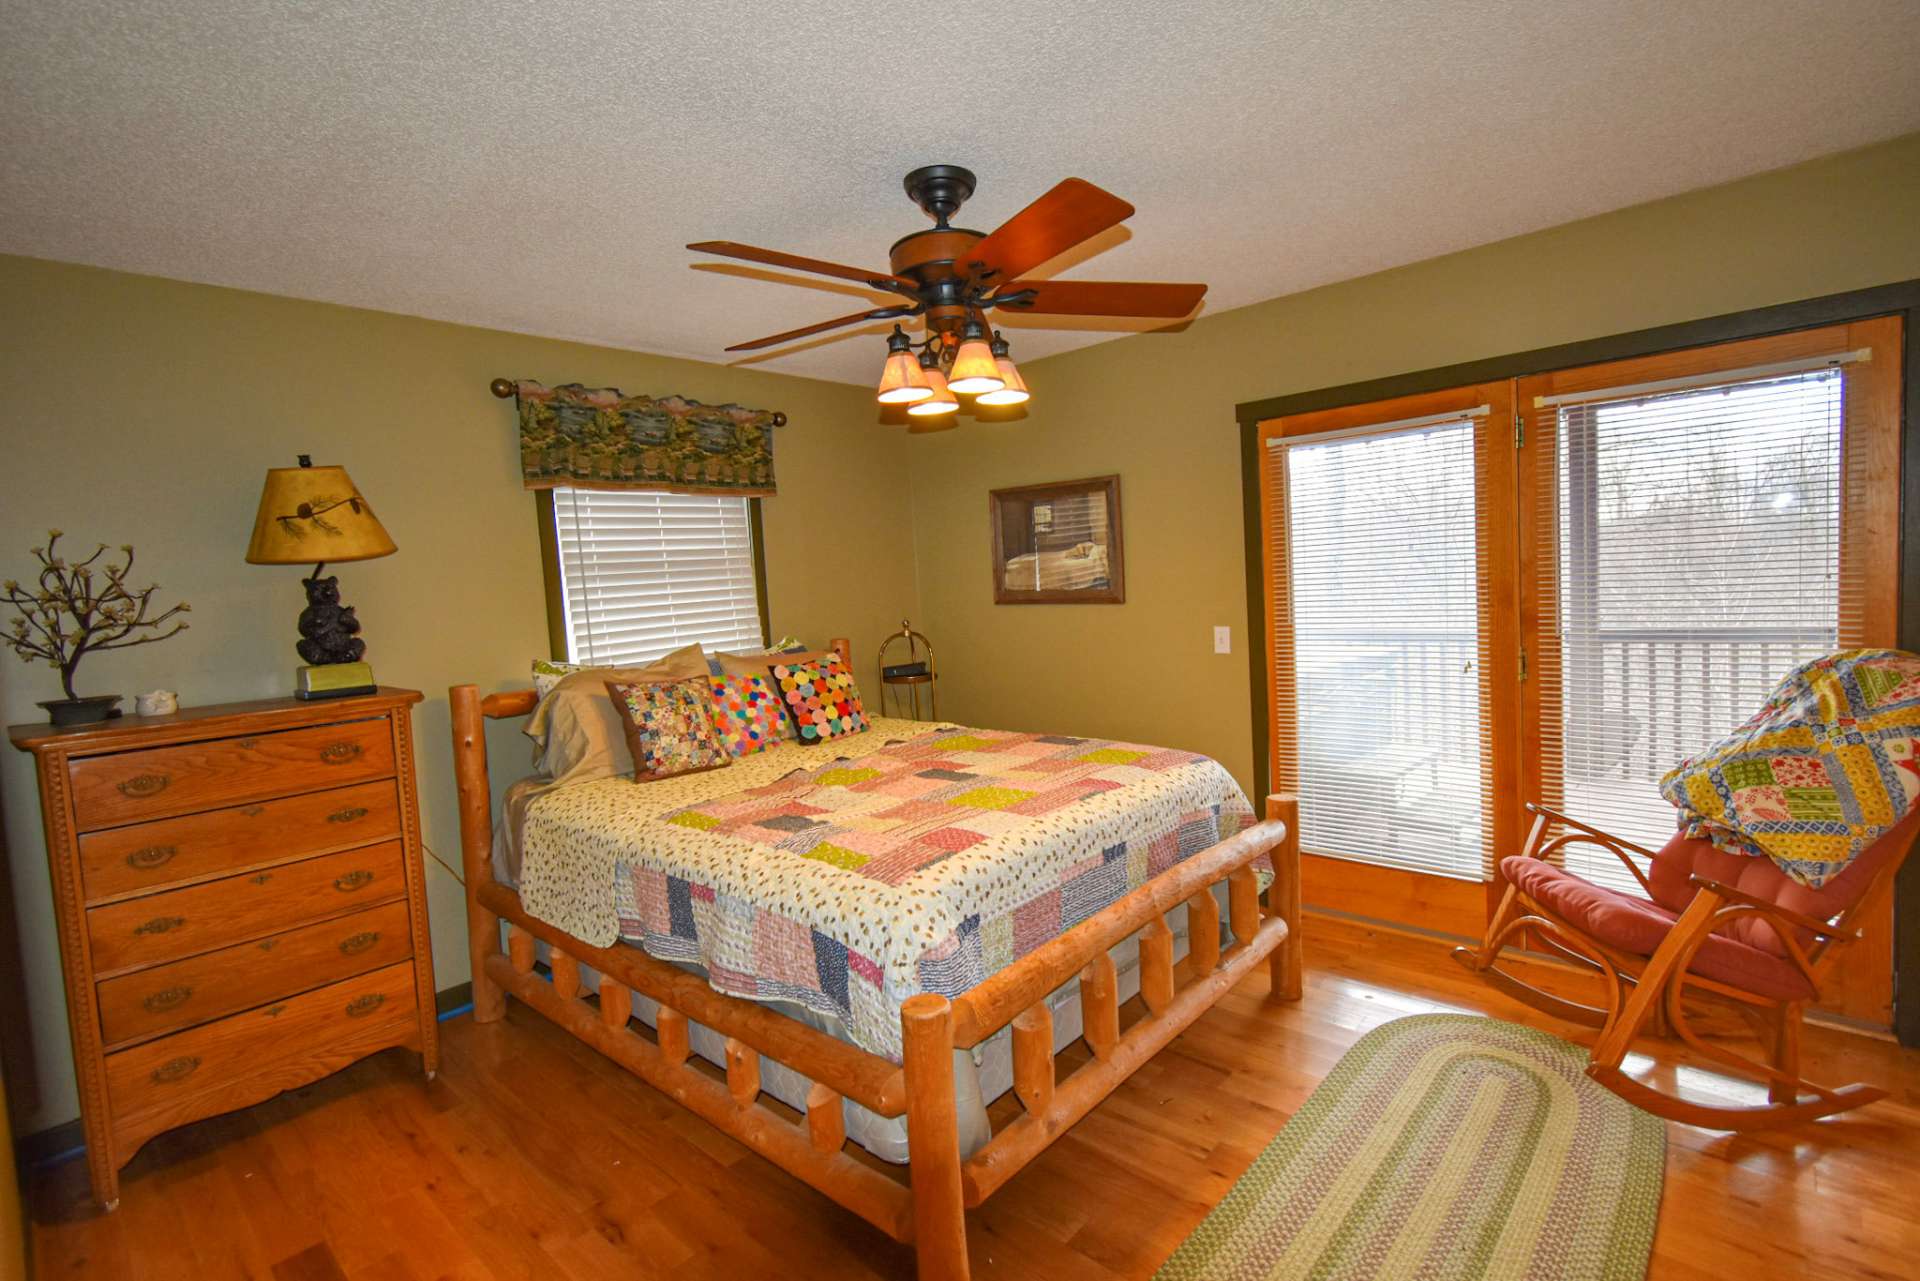 The main level bedroom features hardwood floors and private access to the covered deck.